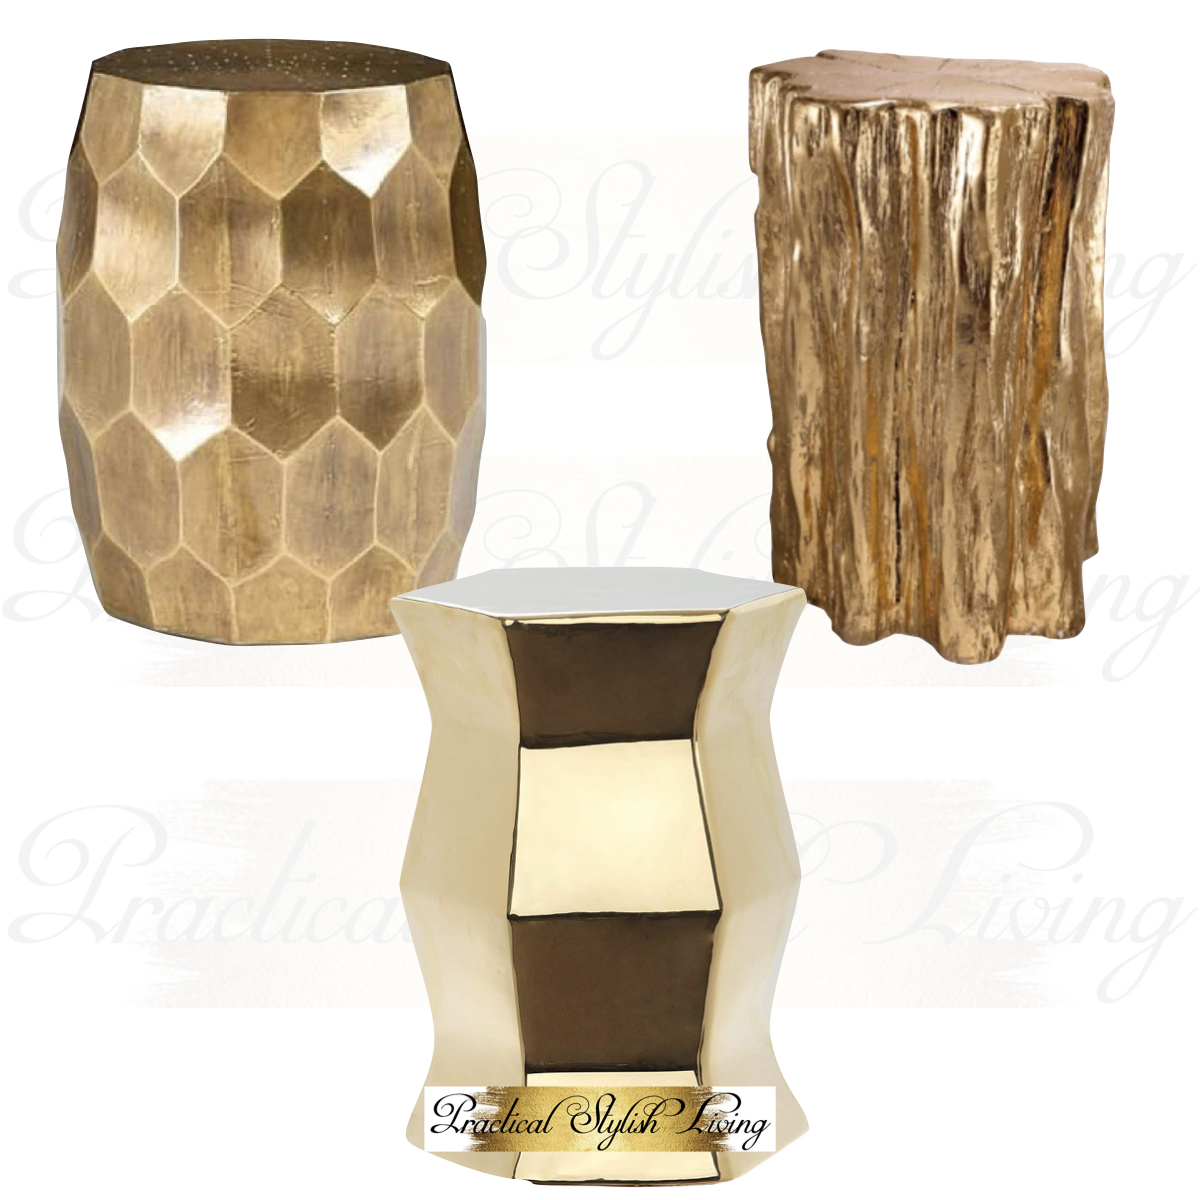 Gold Accent Stools | Practical Stylish Living | Luxe Home Decor